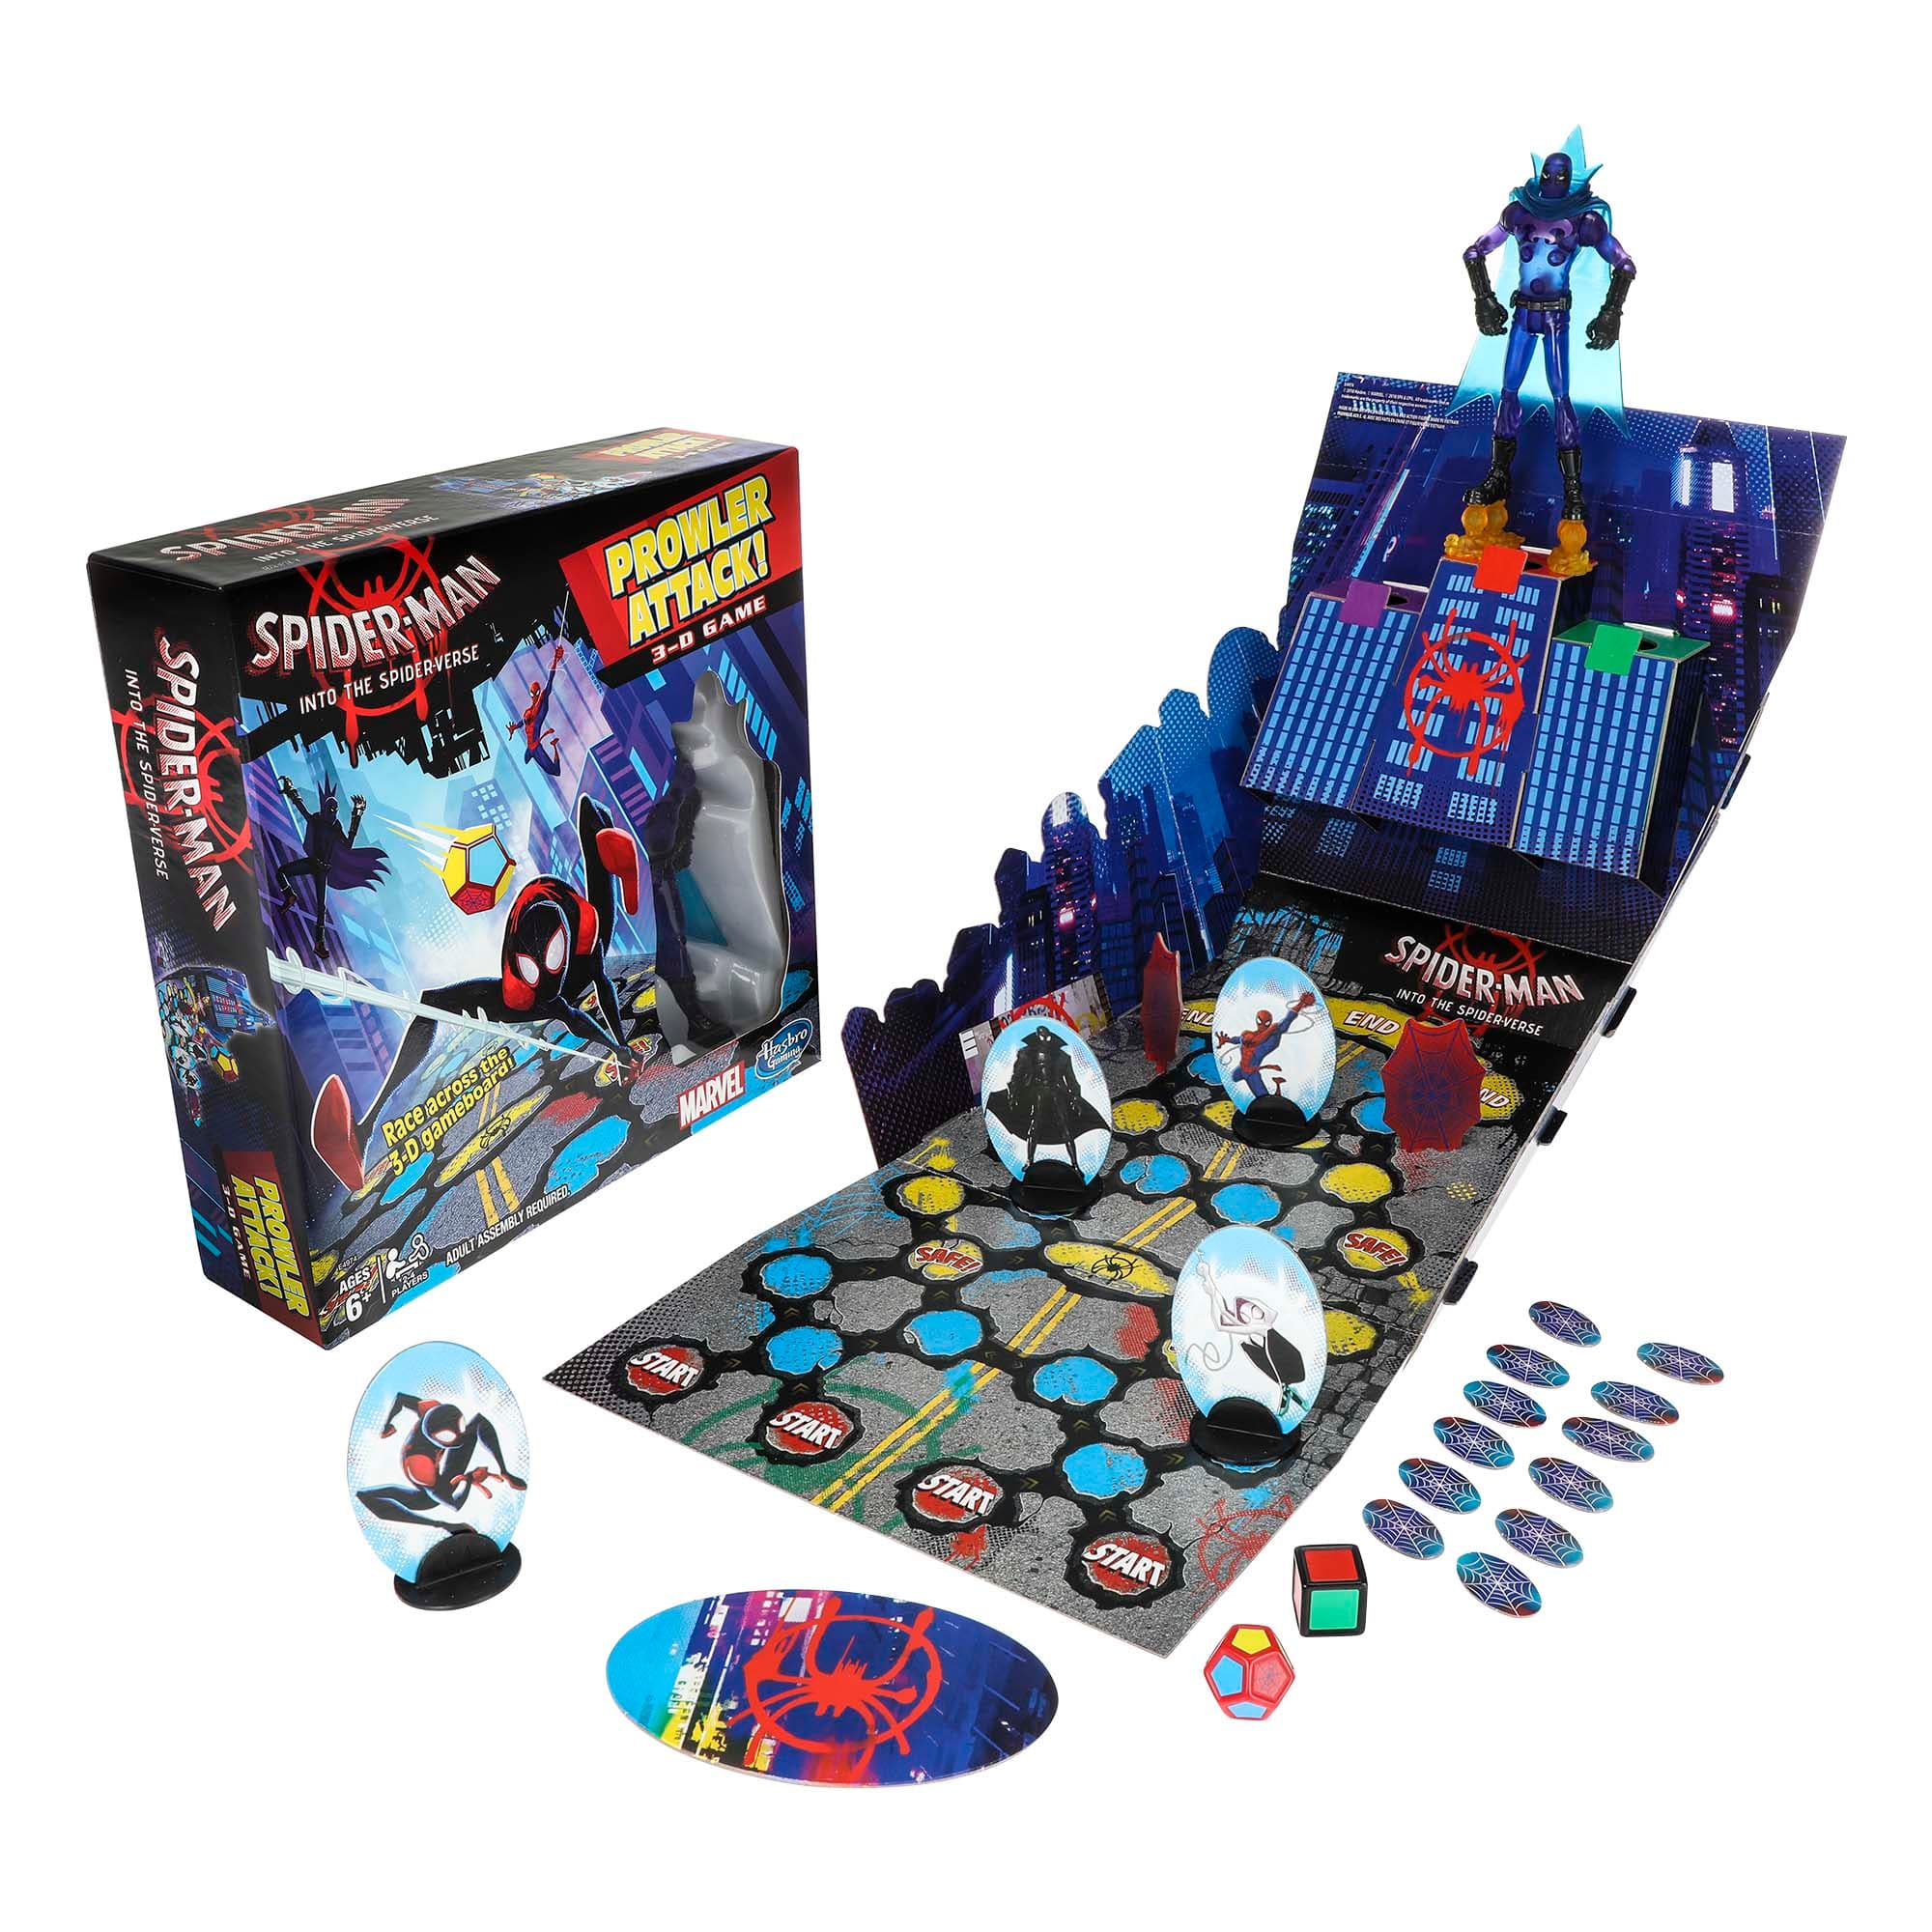 "Spider-Man: Into the Spider-Verse" Prowler Attack 3-D Game